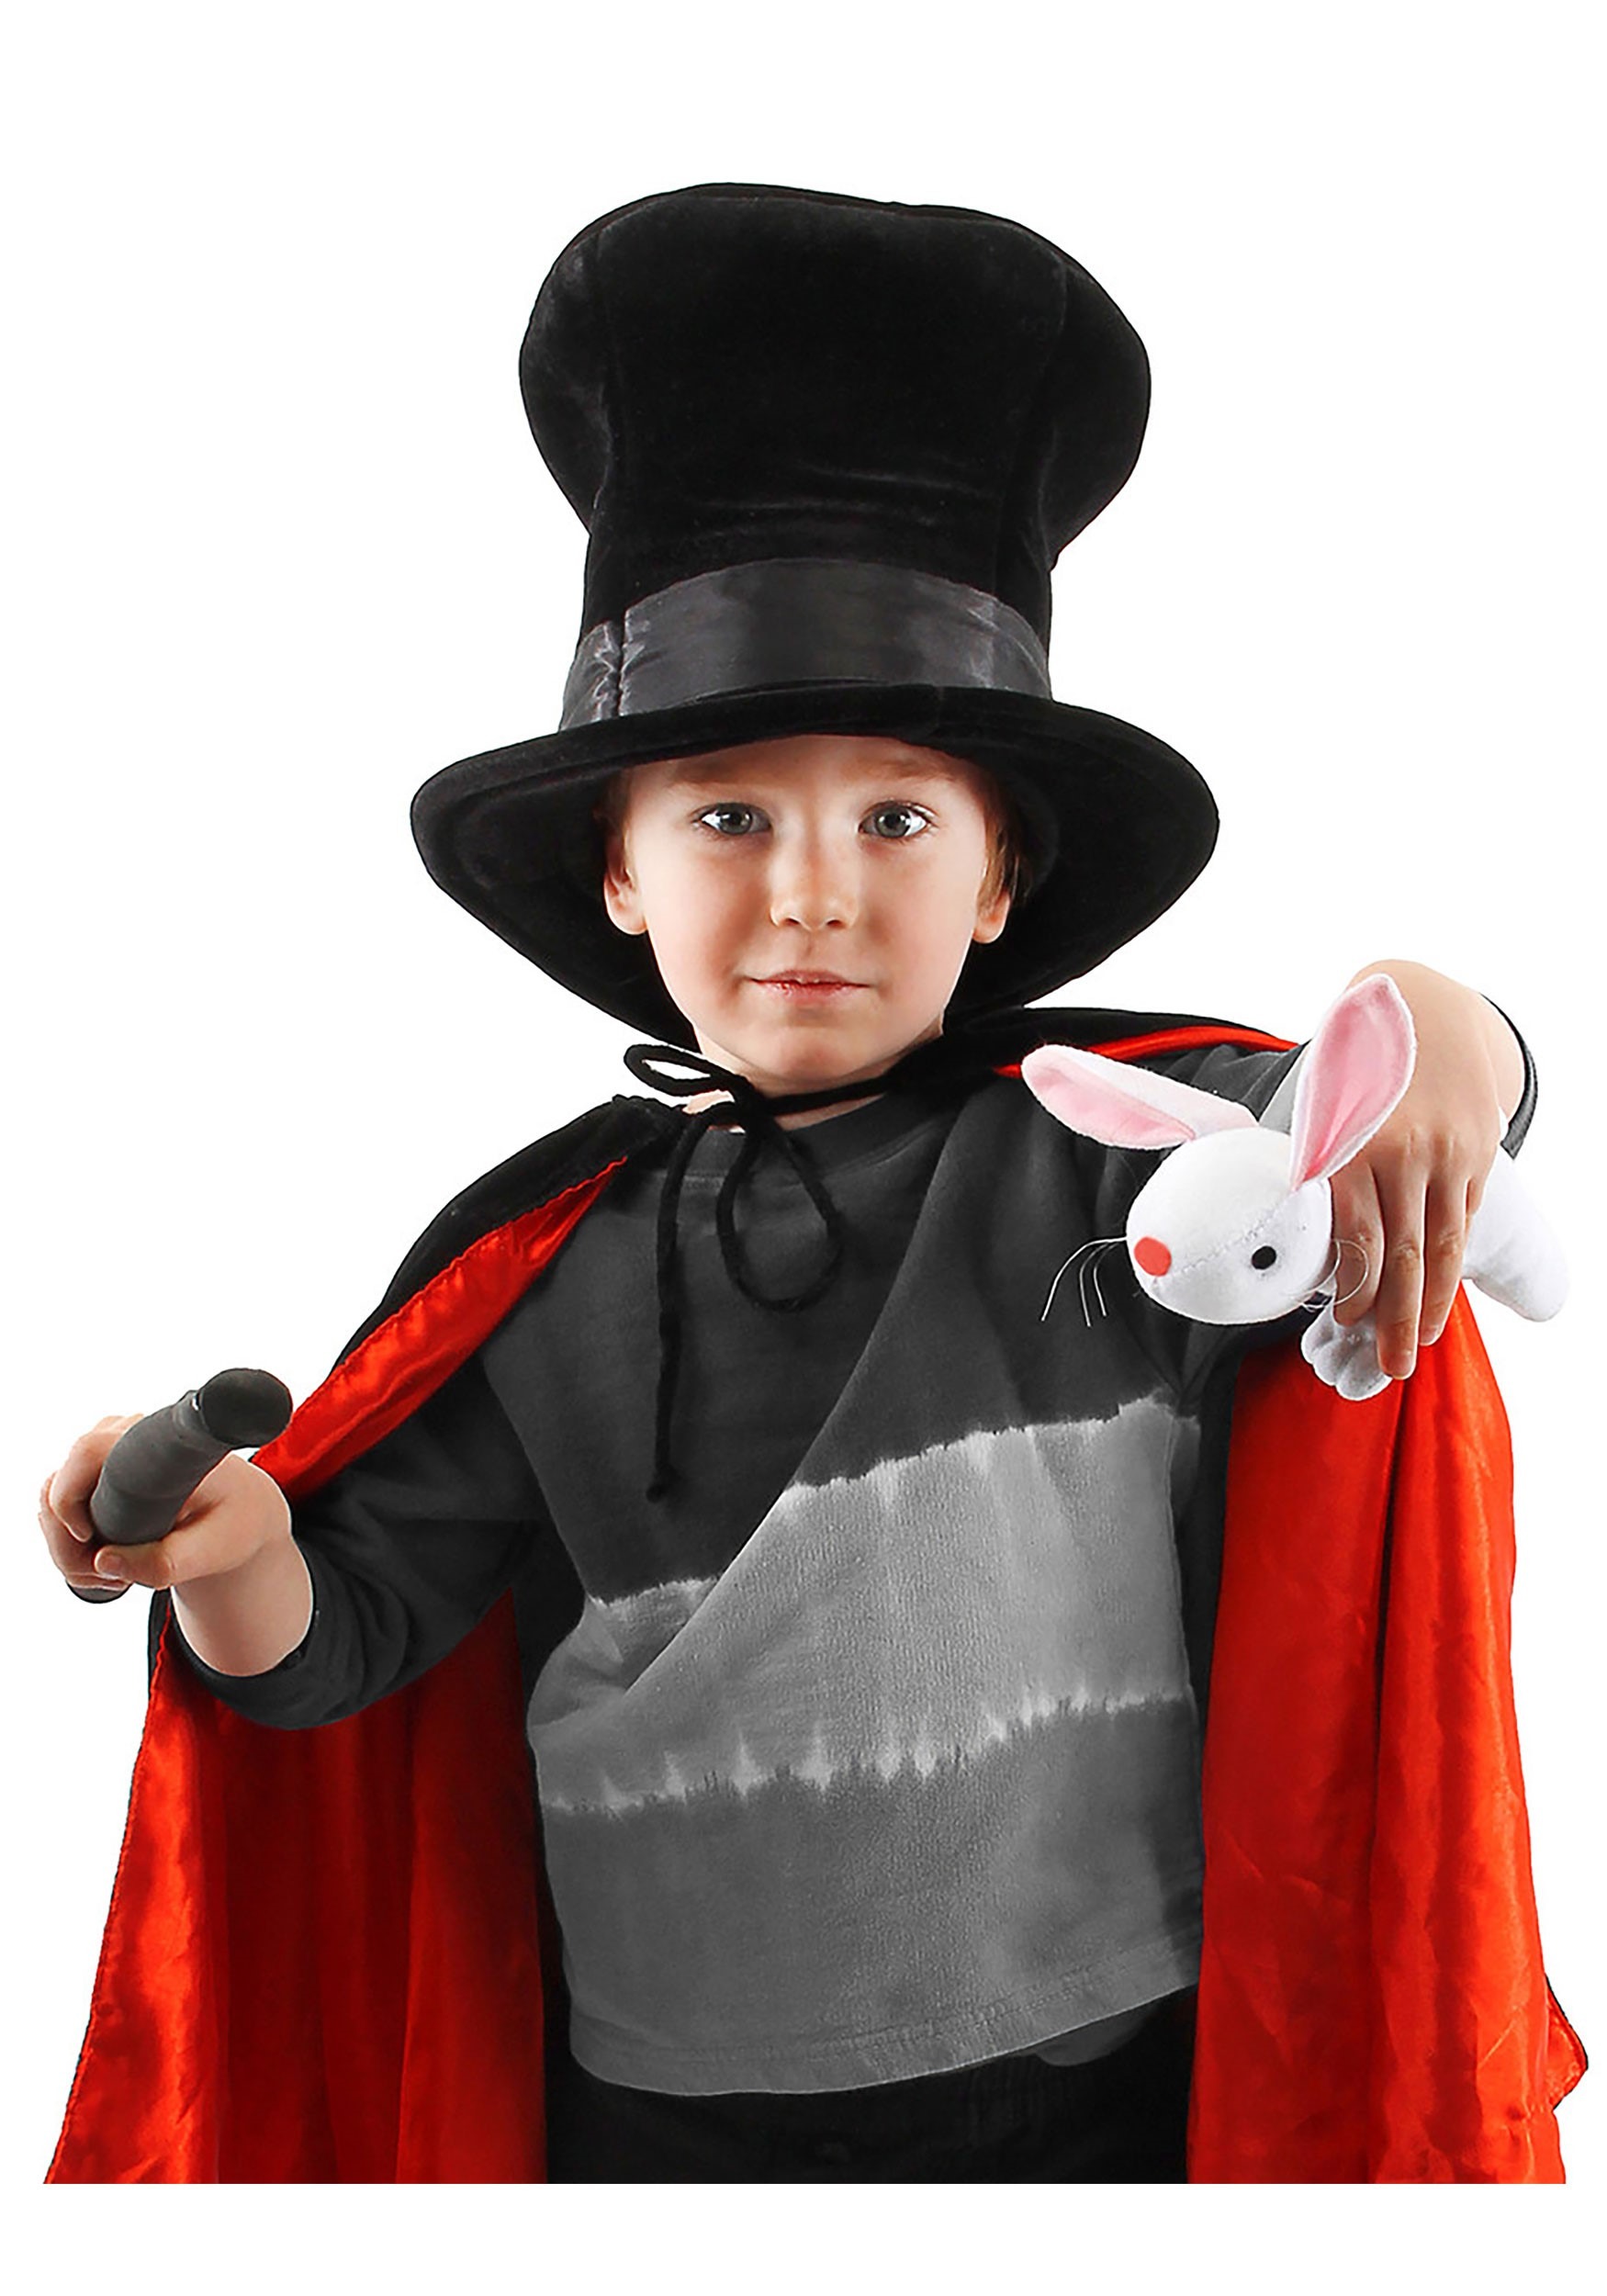 magician costume for little girls